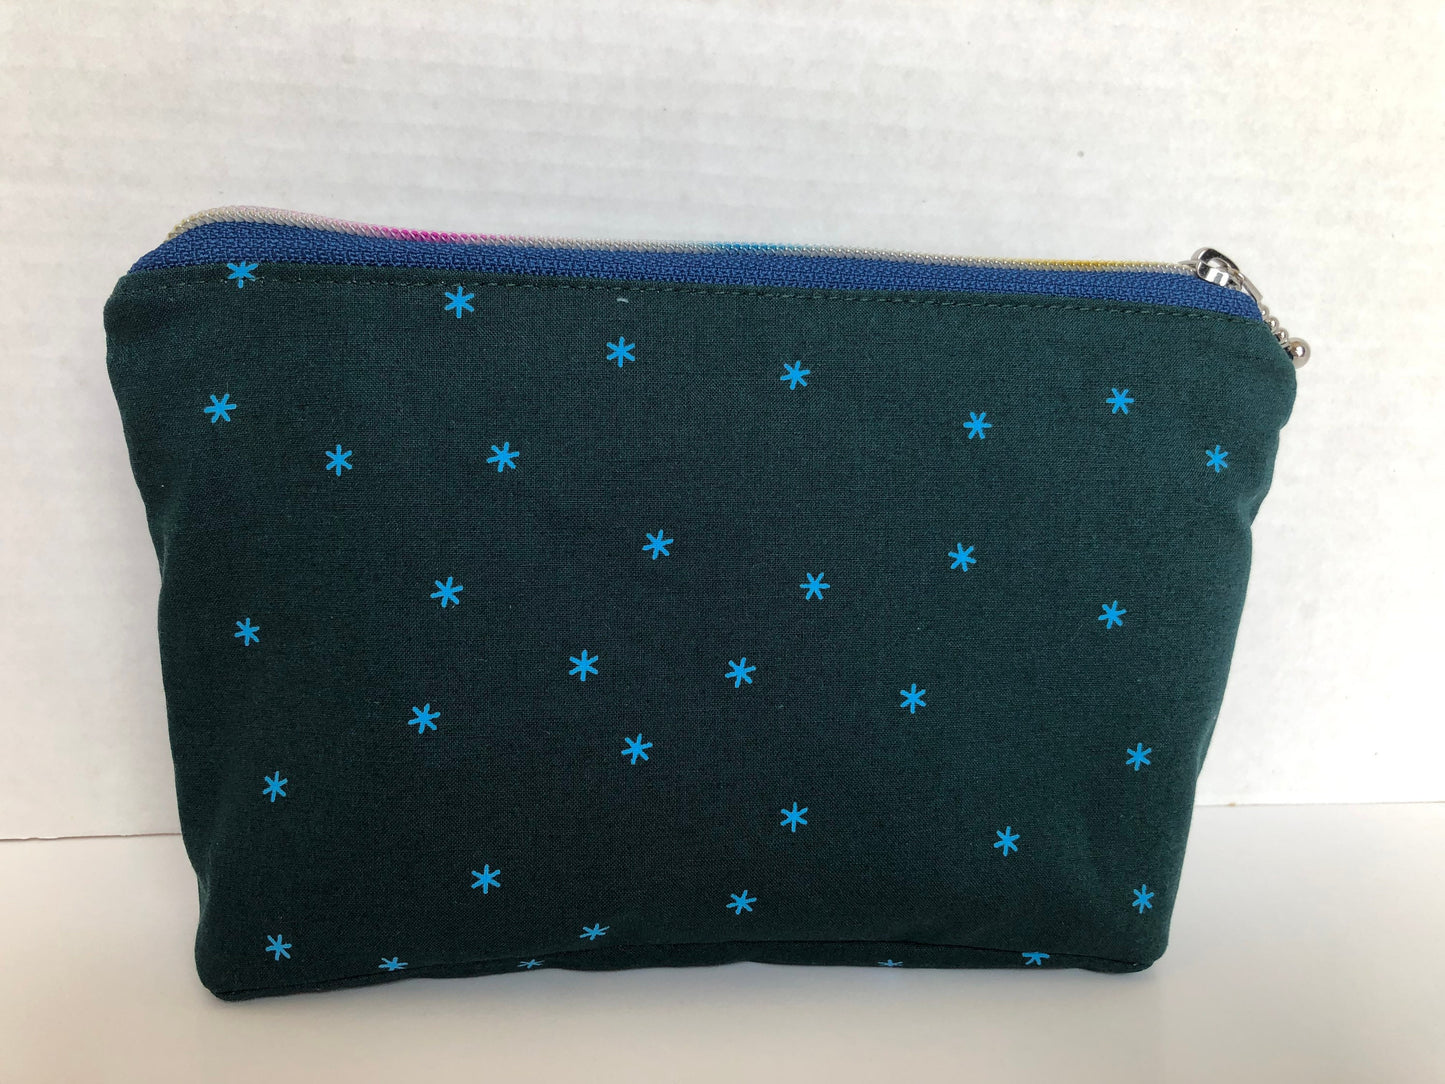 Unicorn and Moon Zipper Pouch with Blue Rainbow and Silver Zippers